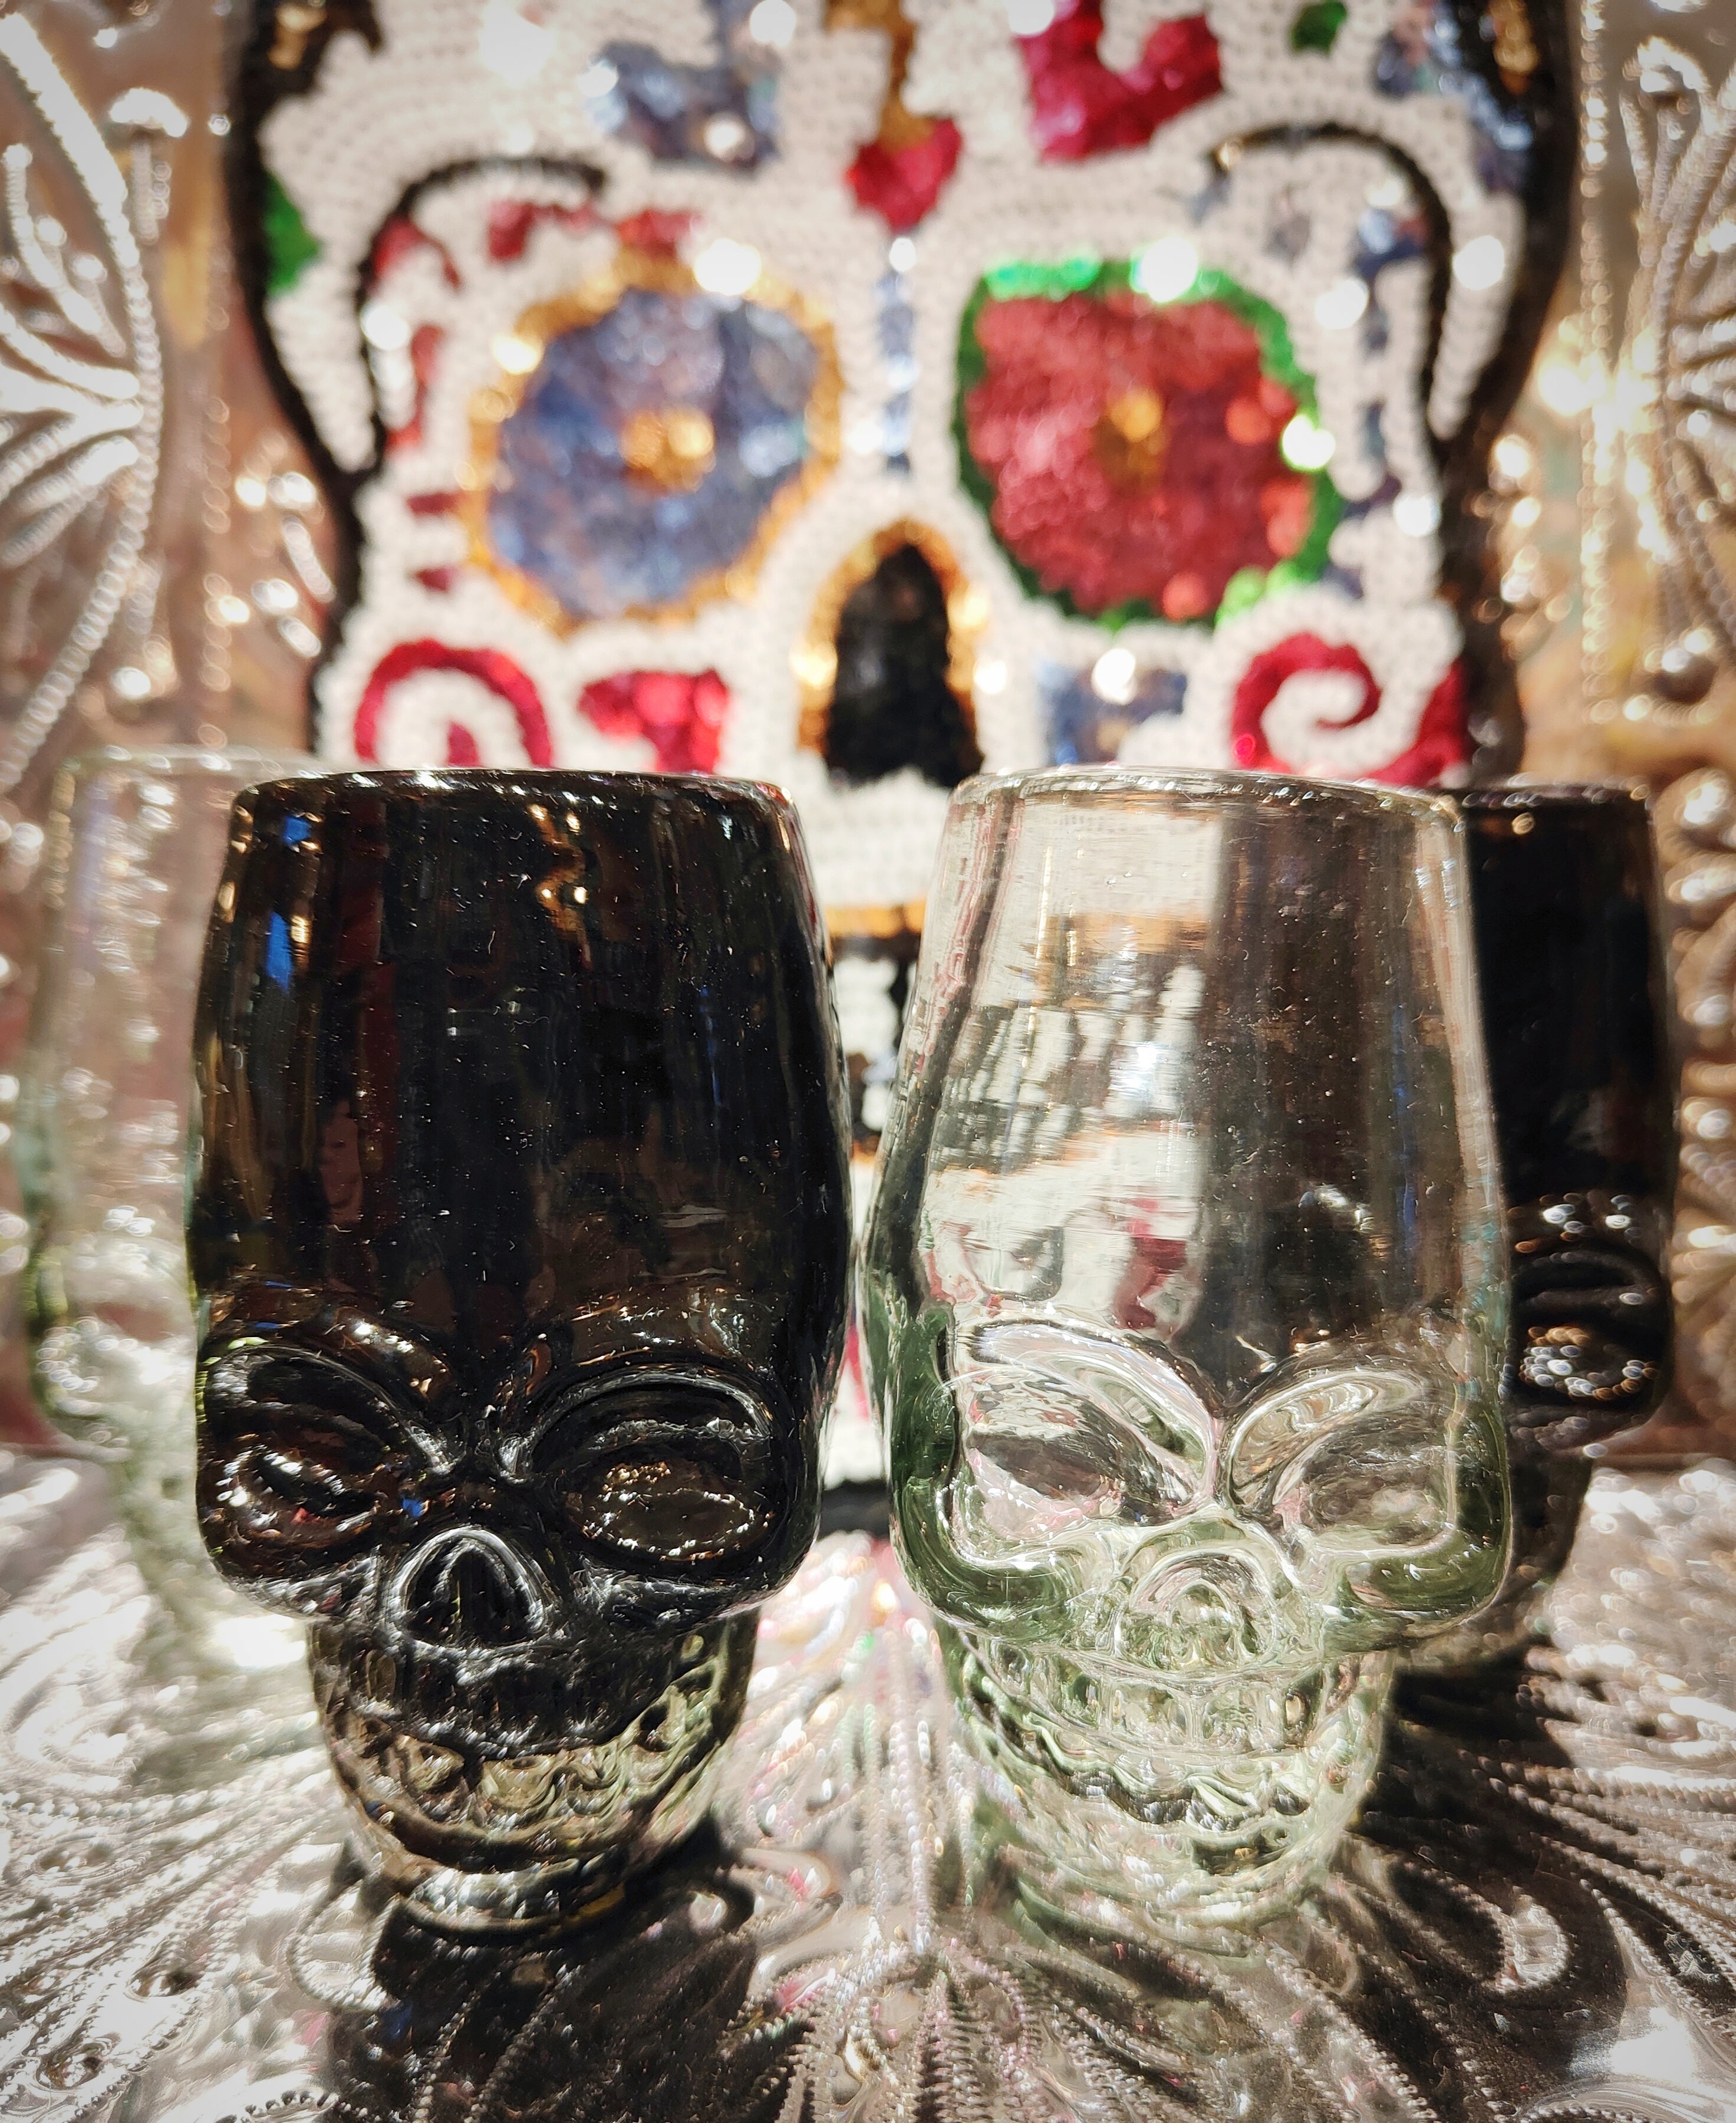 Dastardly Day of the Dead hand blown shot glasses in black or clear recycled glass. Handmade in Mexico these are a fabulous gift and even make super cute posy holders!!

Made in Mexico 

Recycled glass

Dimensions vary as these are handmade but around 9cm x 5cm x 5cm

